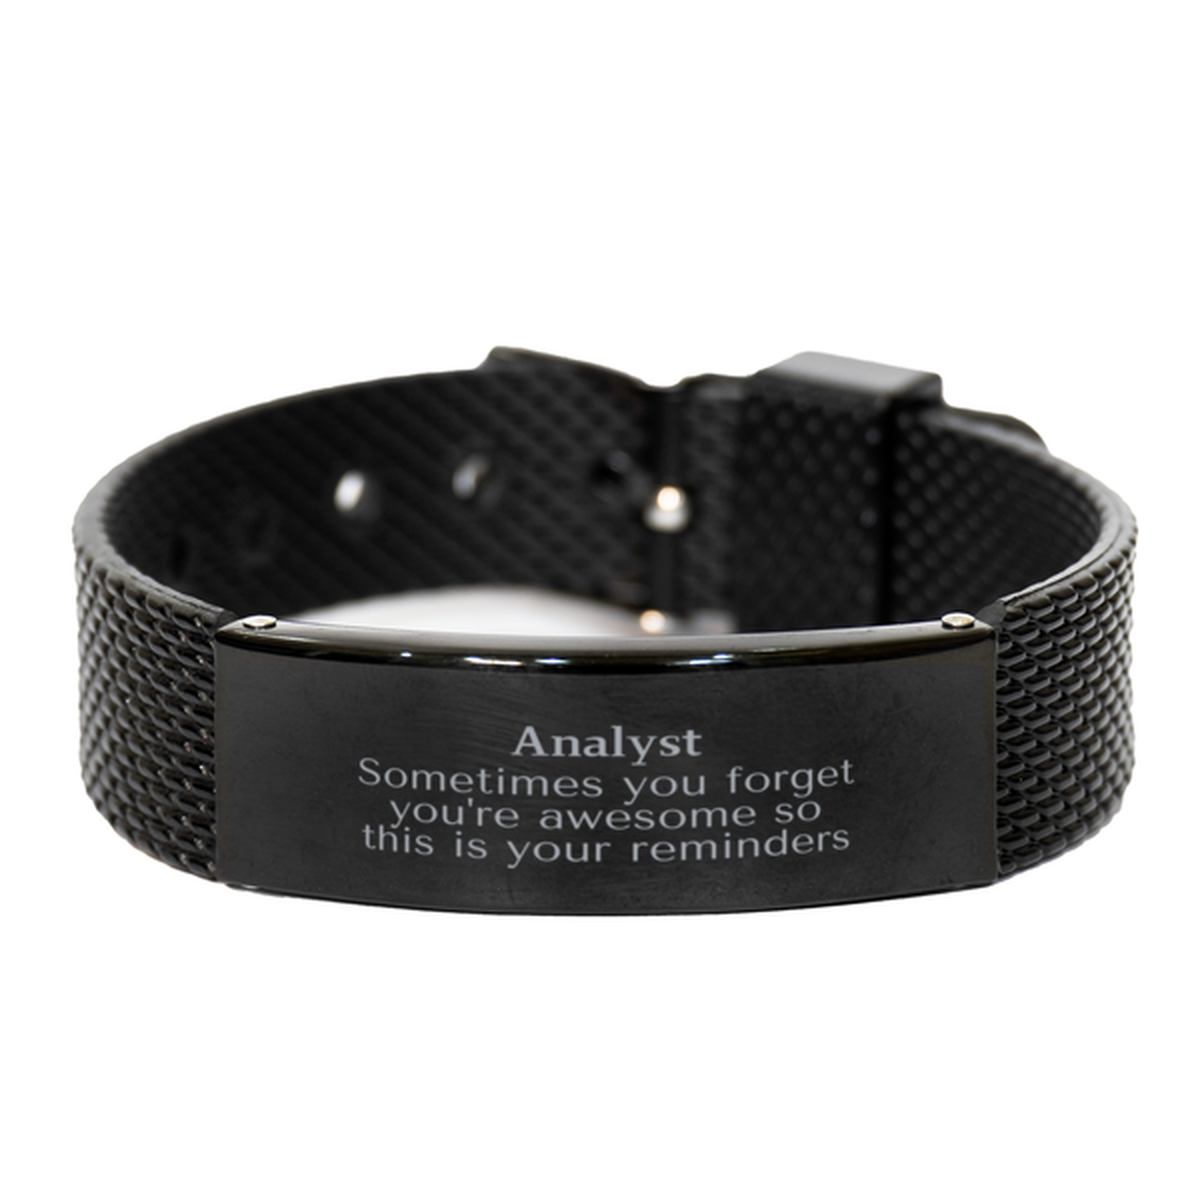 Sentimental Analyst Black Shark Mesh Bracelet, Analyst Sometimes you forget you're awesome so this is your reminders, Graduation Christmas Birthday Gifts for Analyst, Men, Women, Coworkers